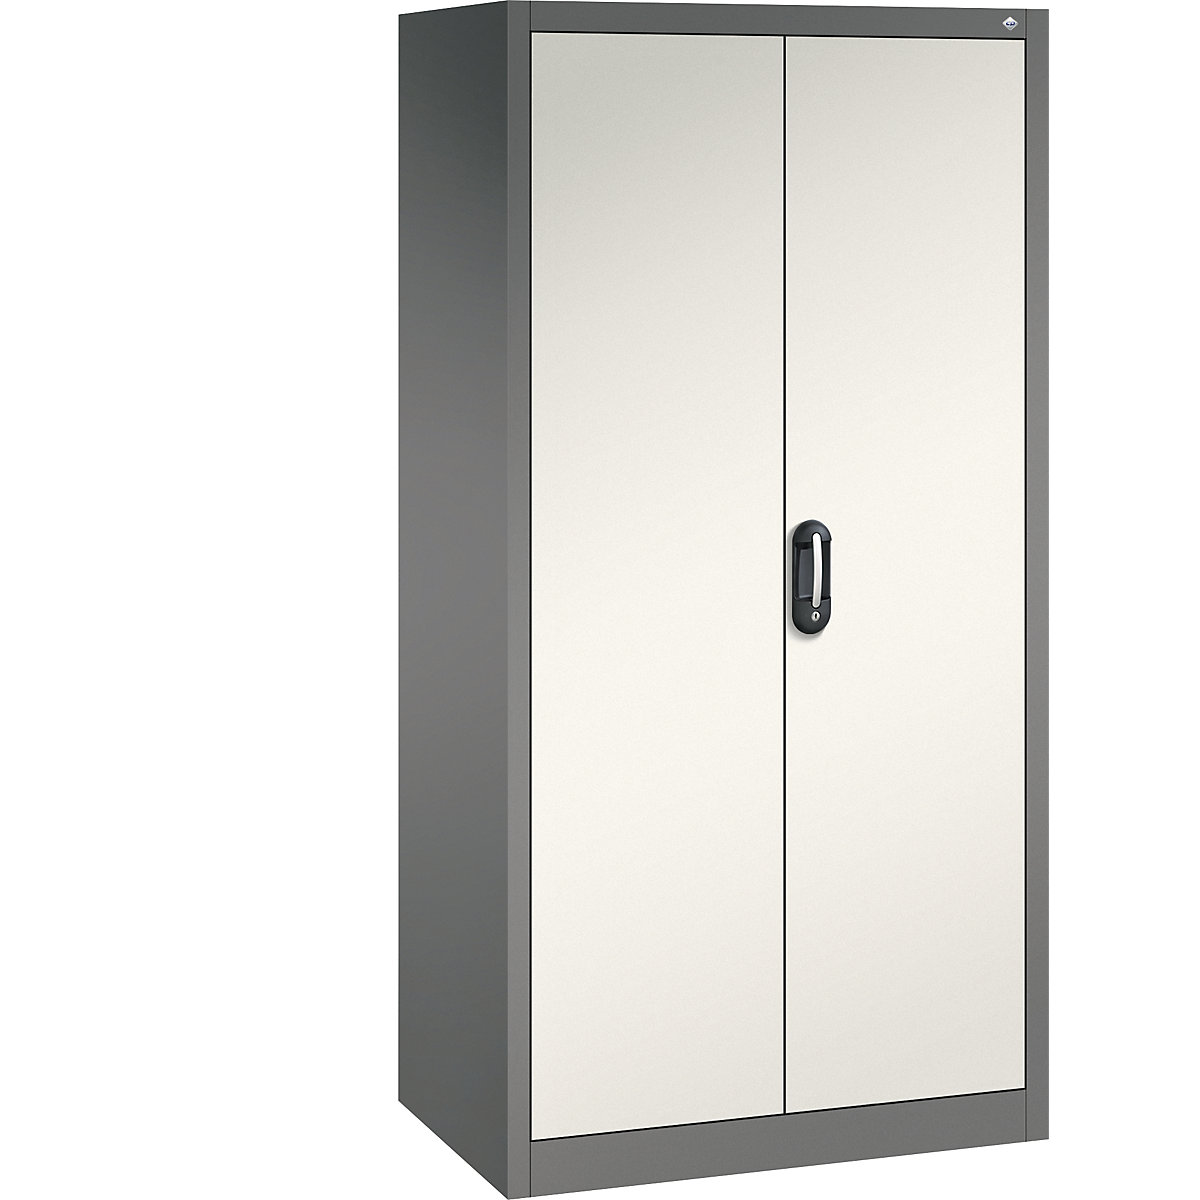 ACURADO universal cupboard – C+P, WxD 930 x 600 mm, volcanic grey / oyster white-29